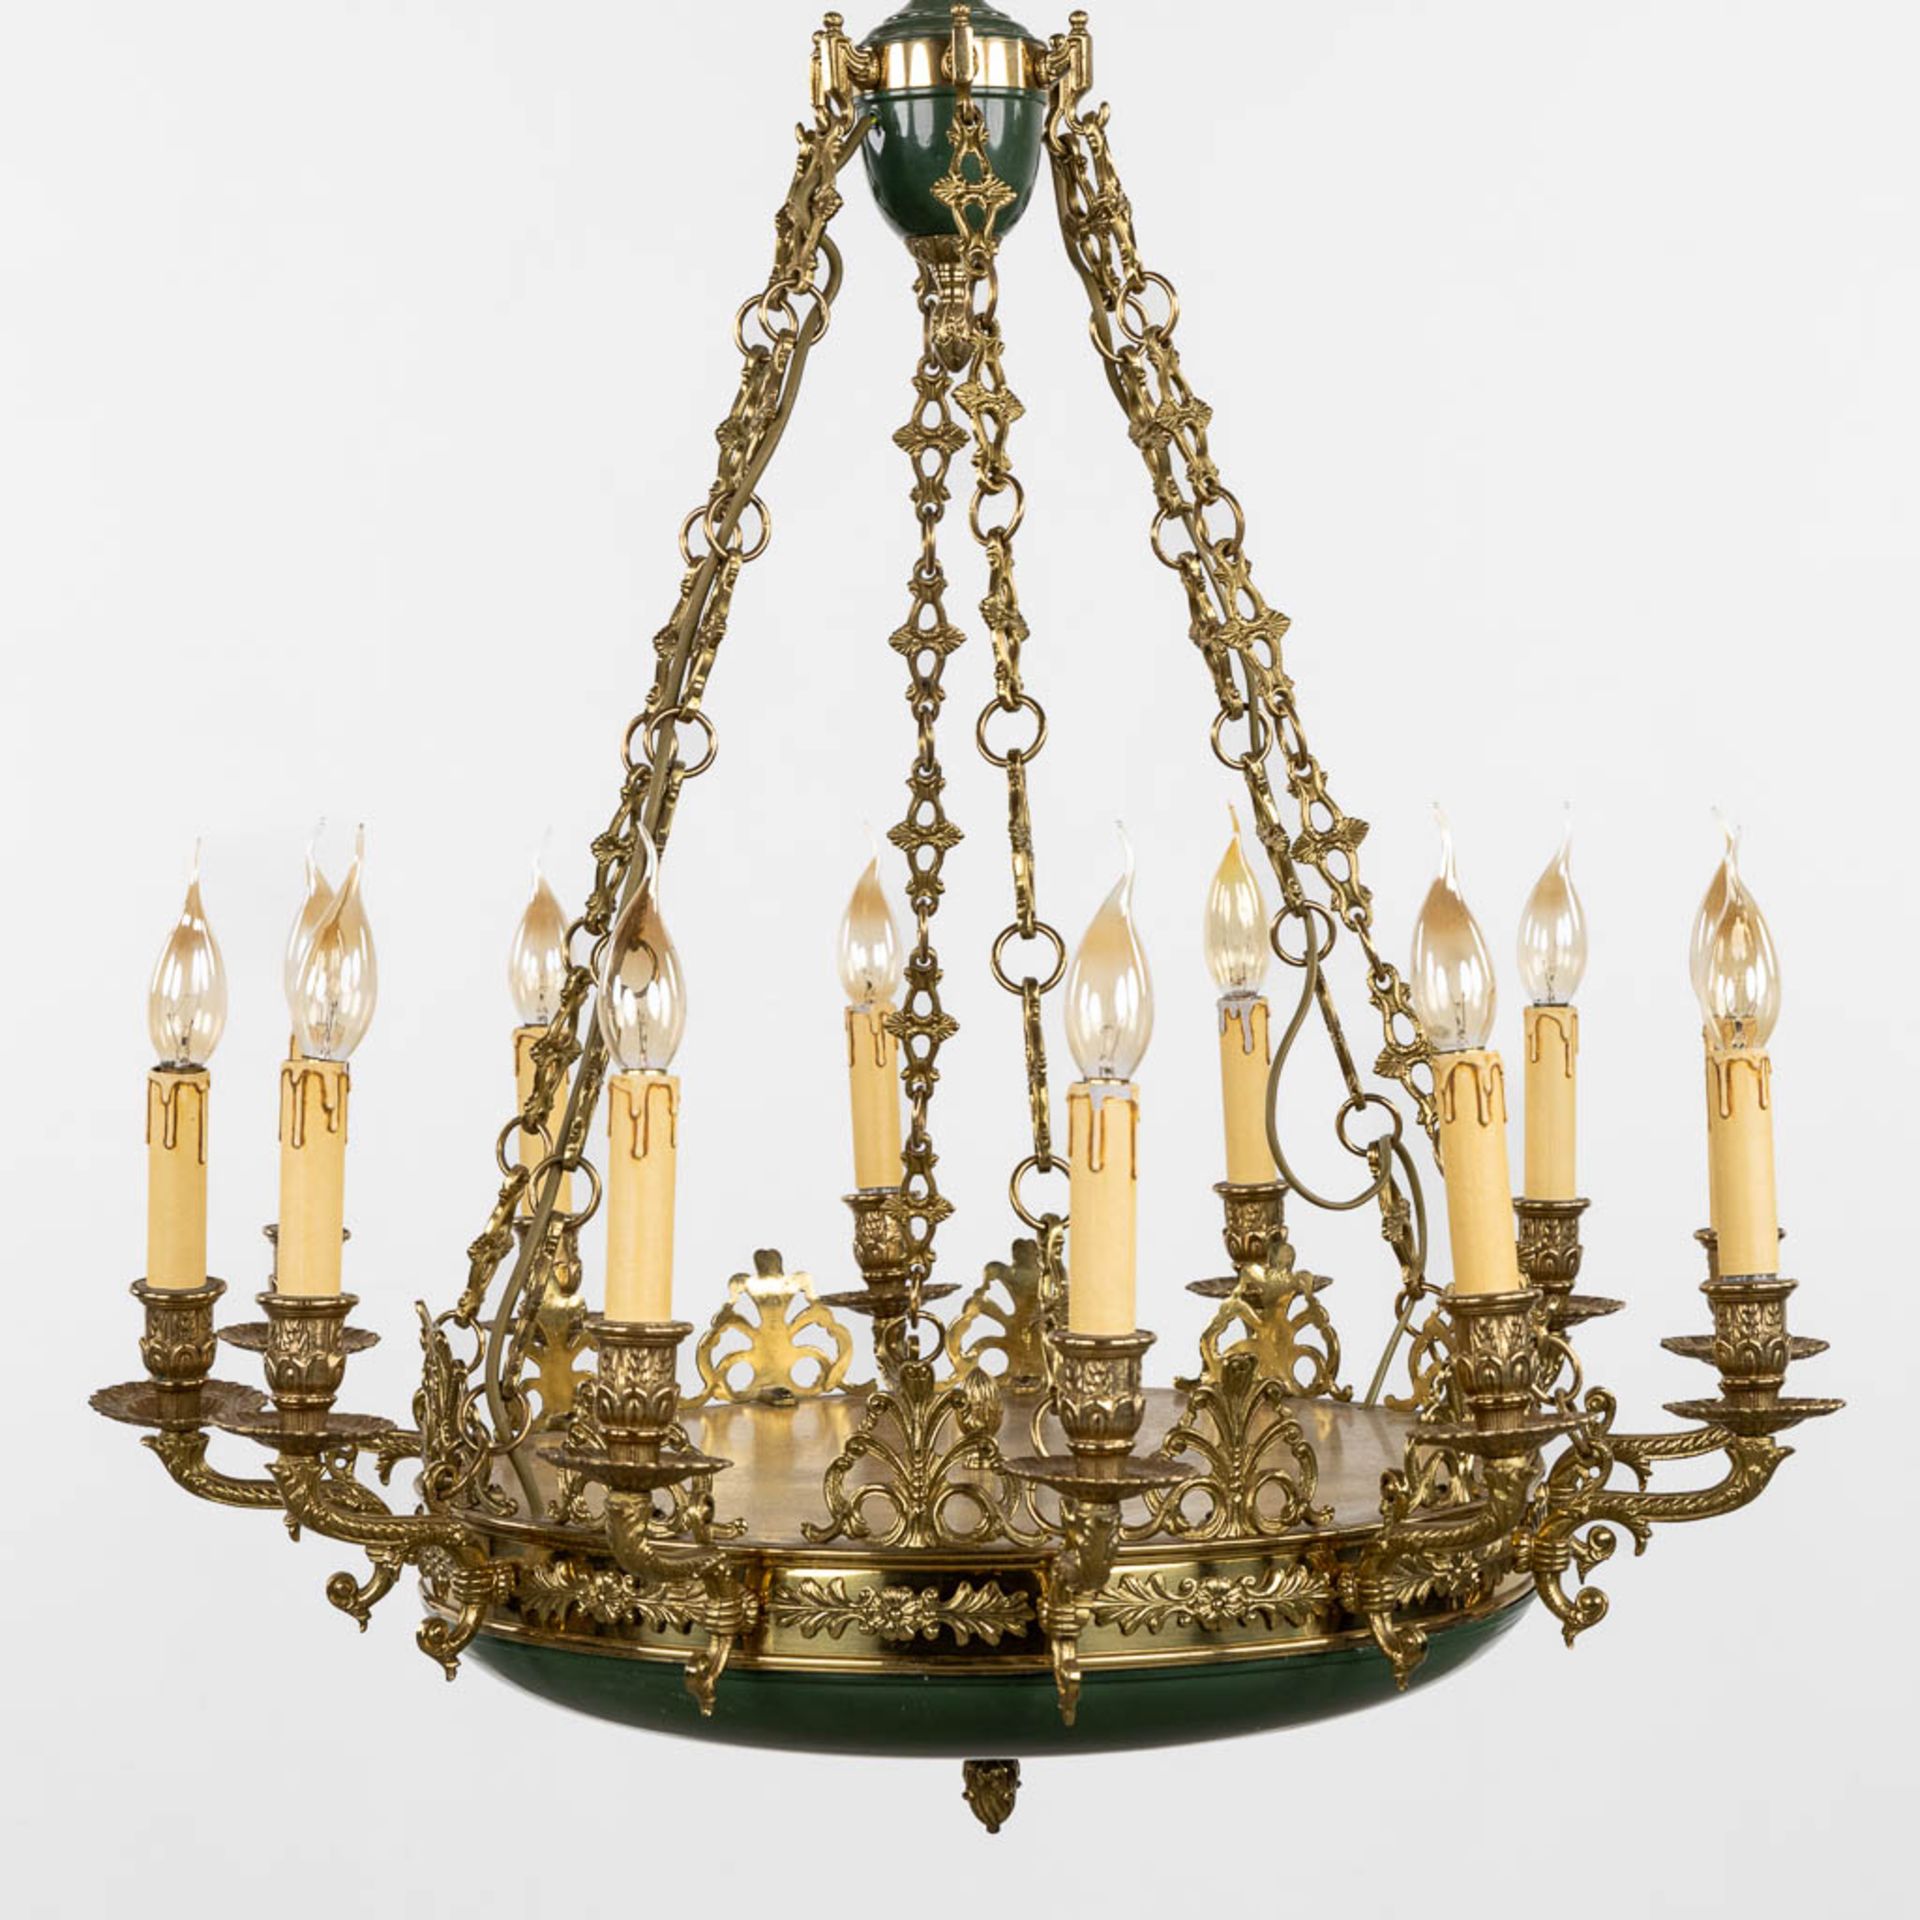 A chandelier, brass in Empire style. Circa 1970. (H:104 x D:73 cm) - Image 3 of 8